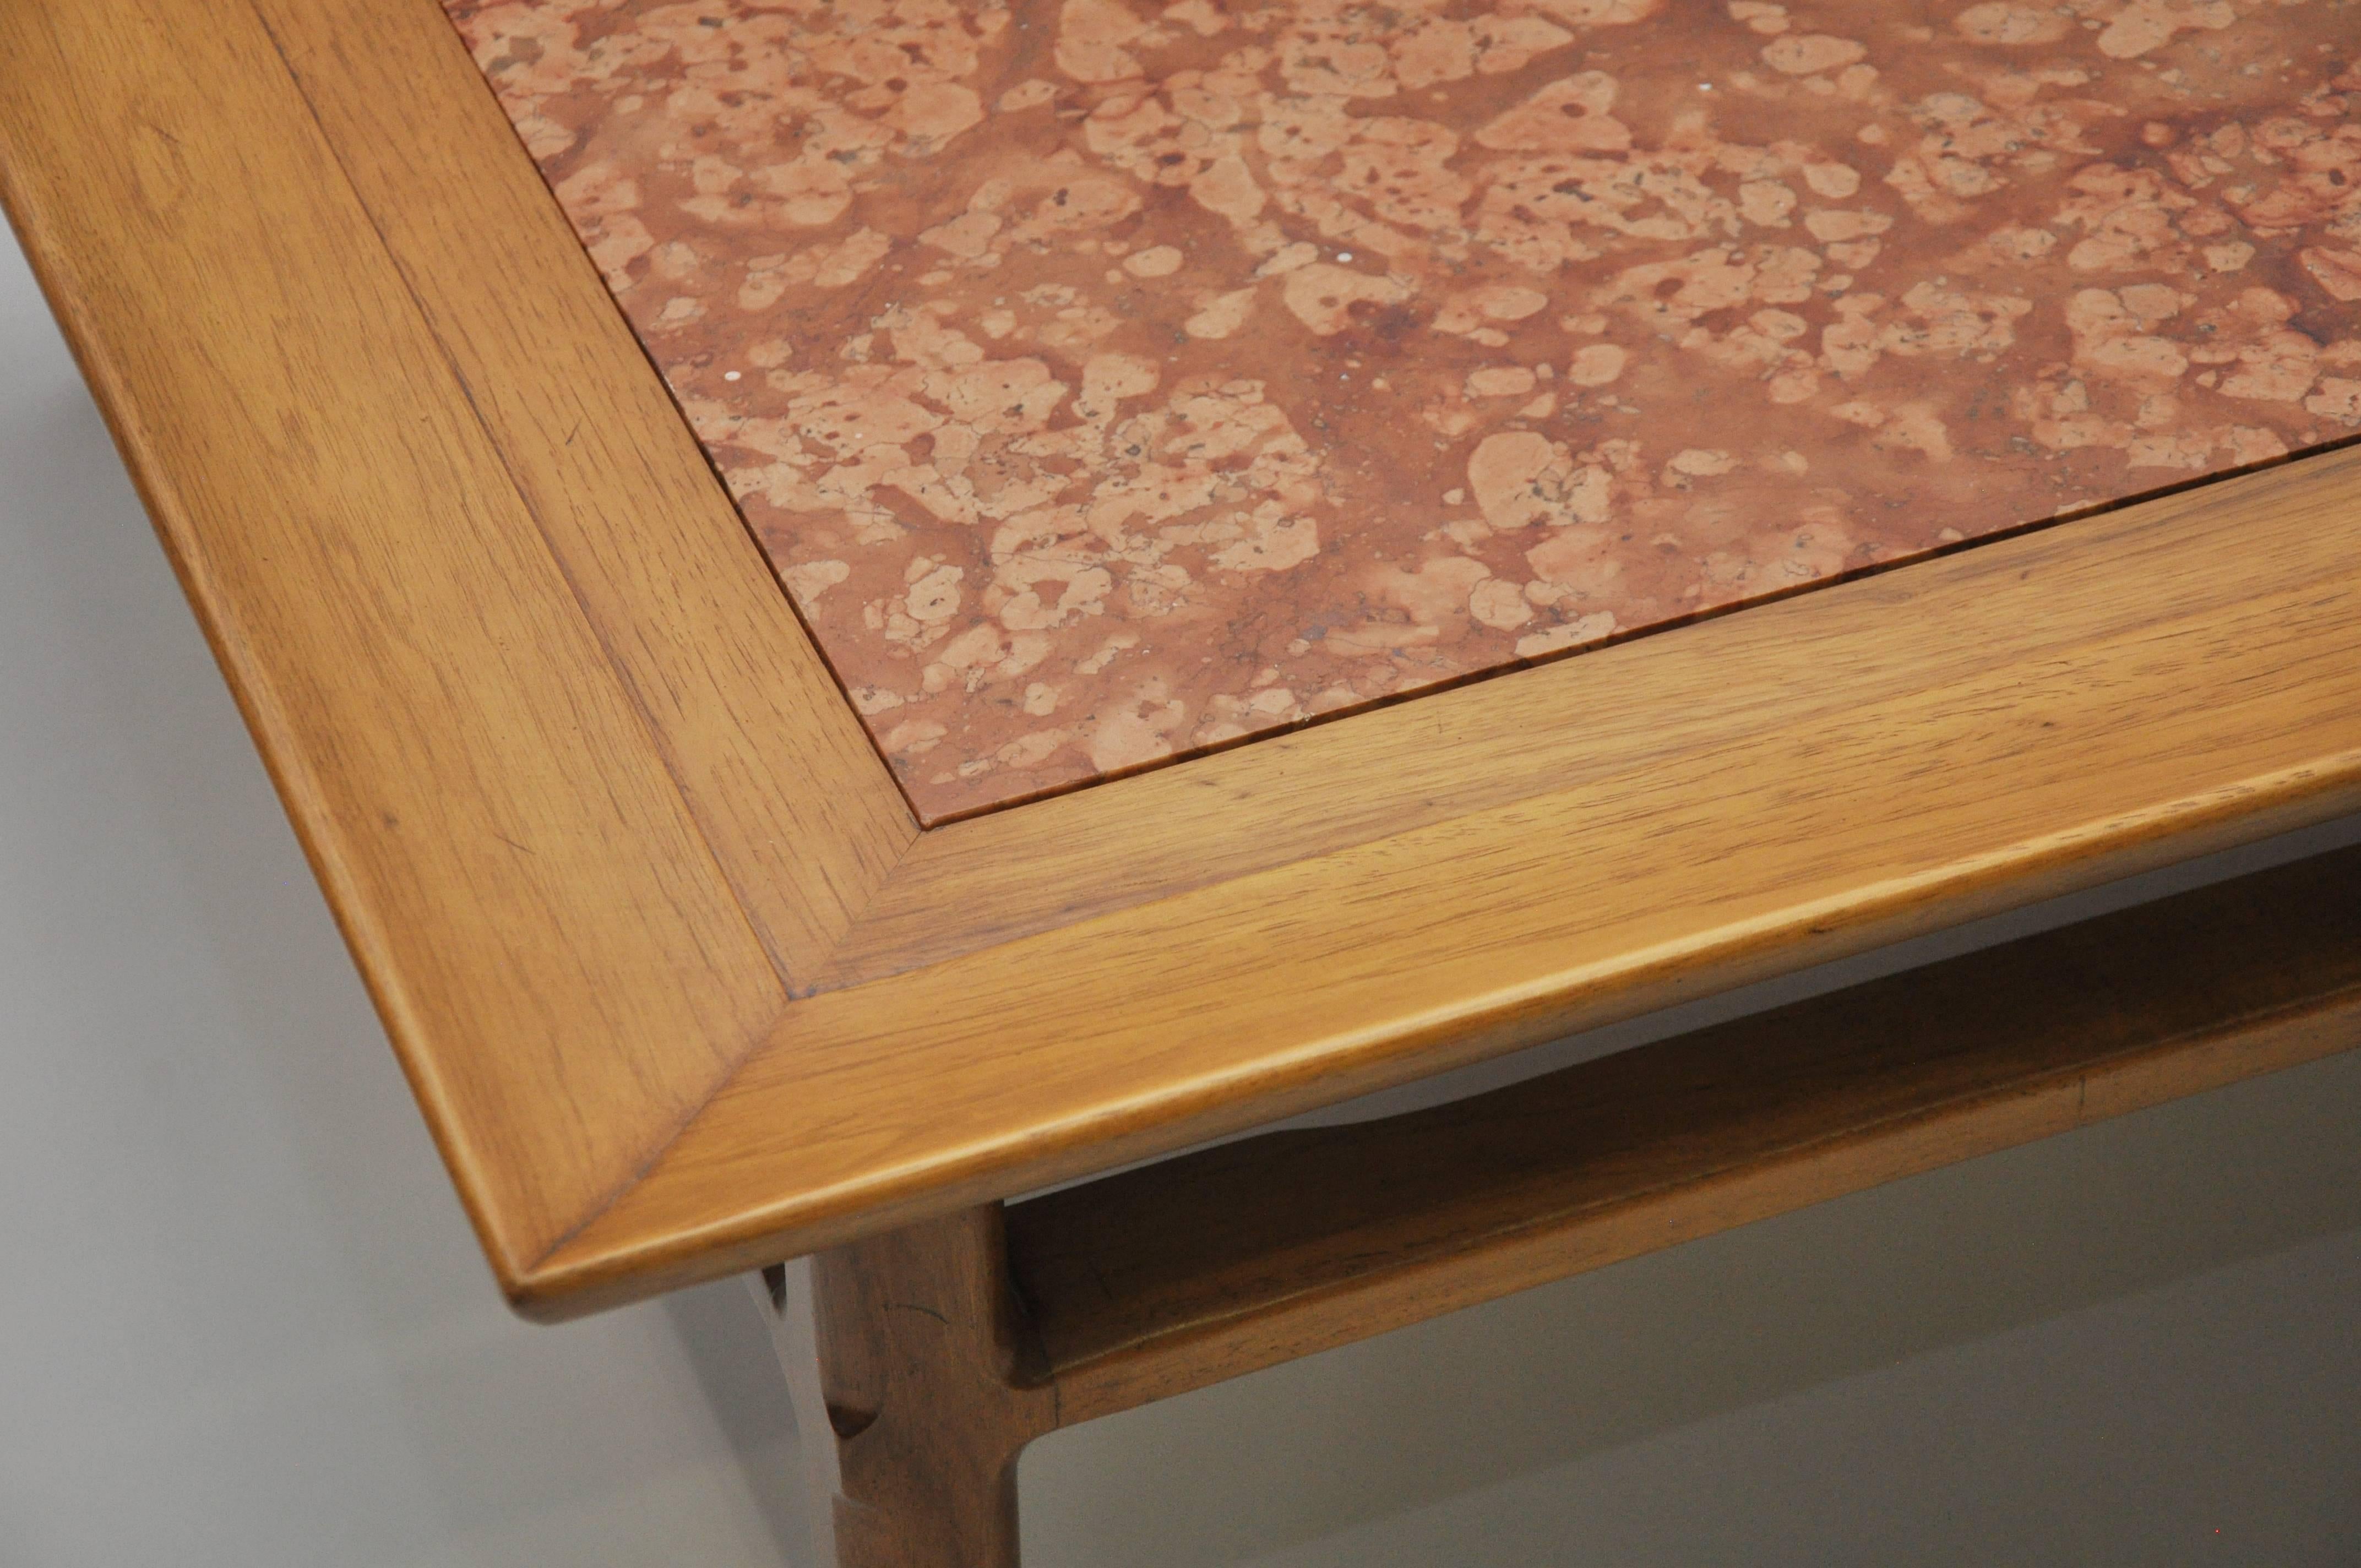 Mid-20th Century Sleek Mid-Century Modern Pecan and Marble Coffee Table by Tomlinson For Sale